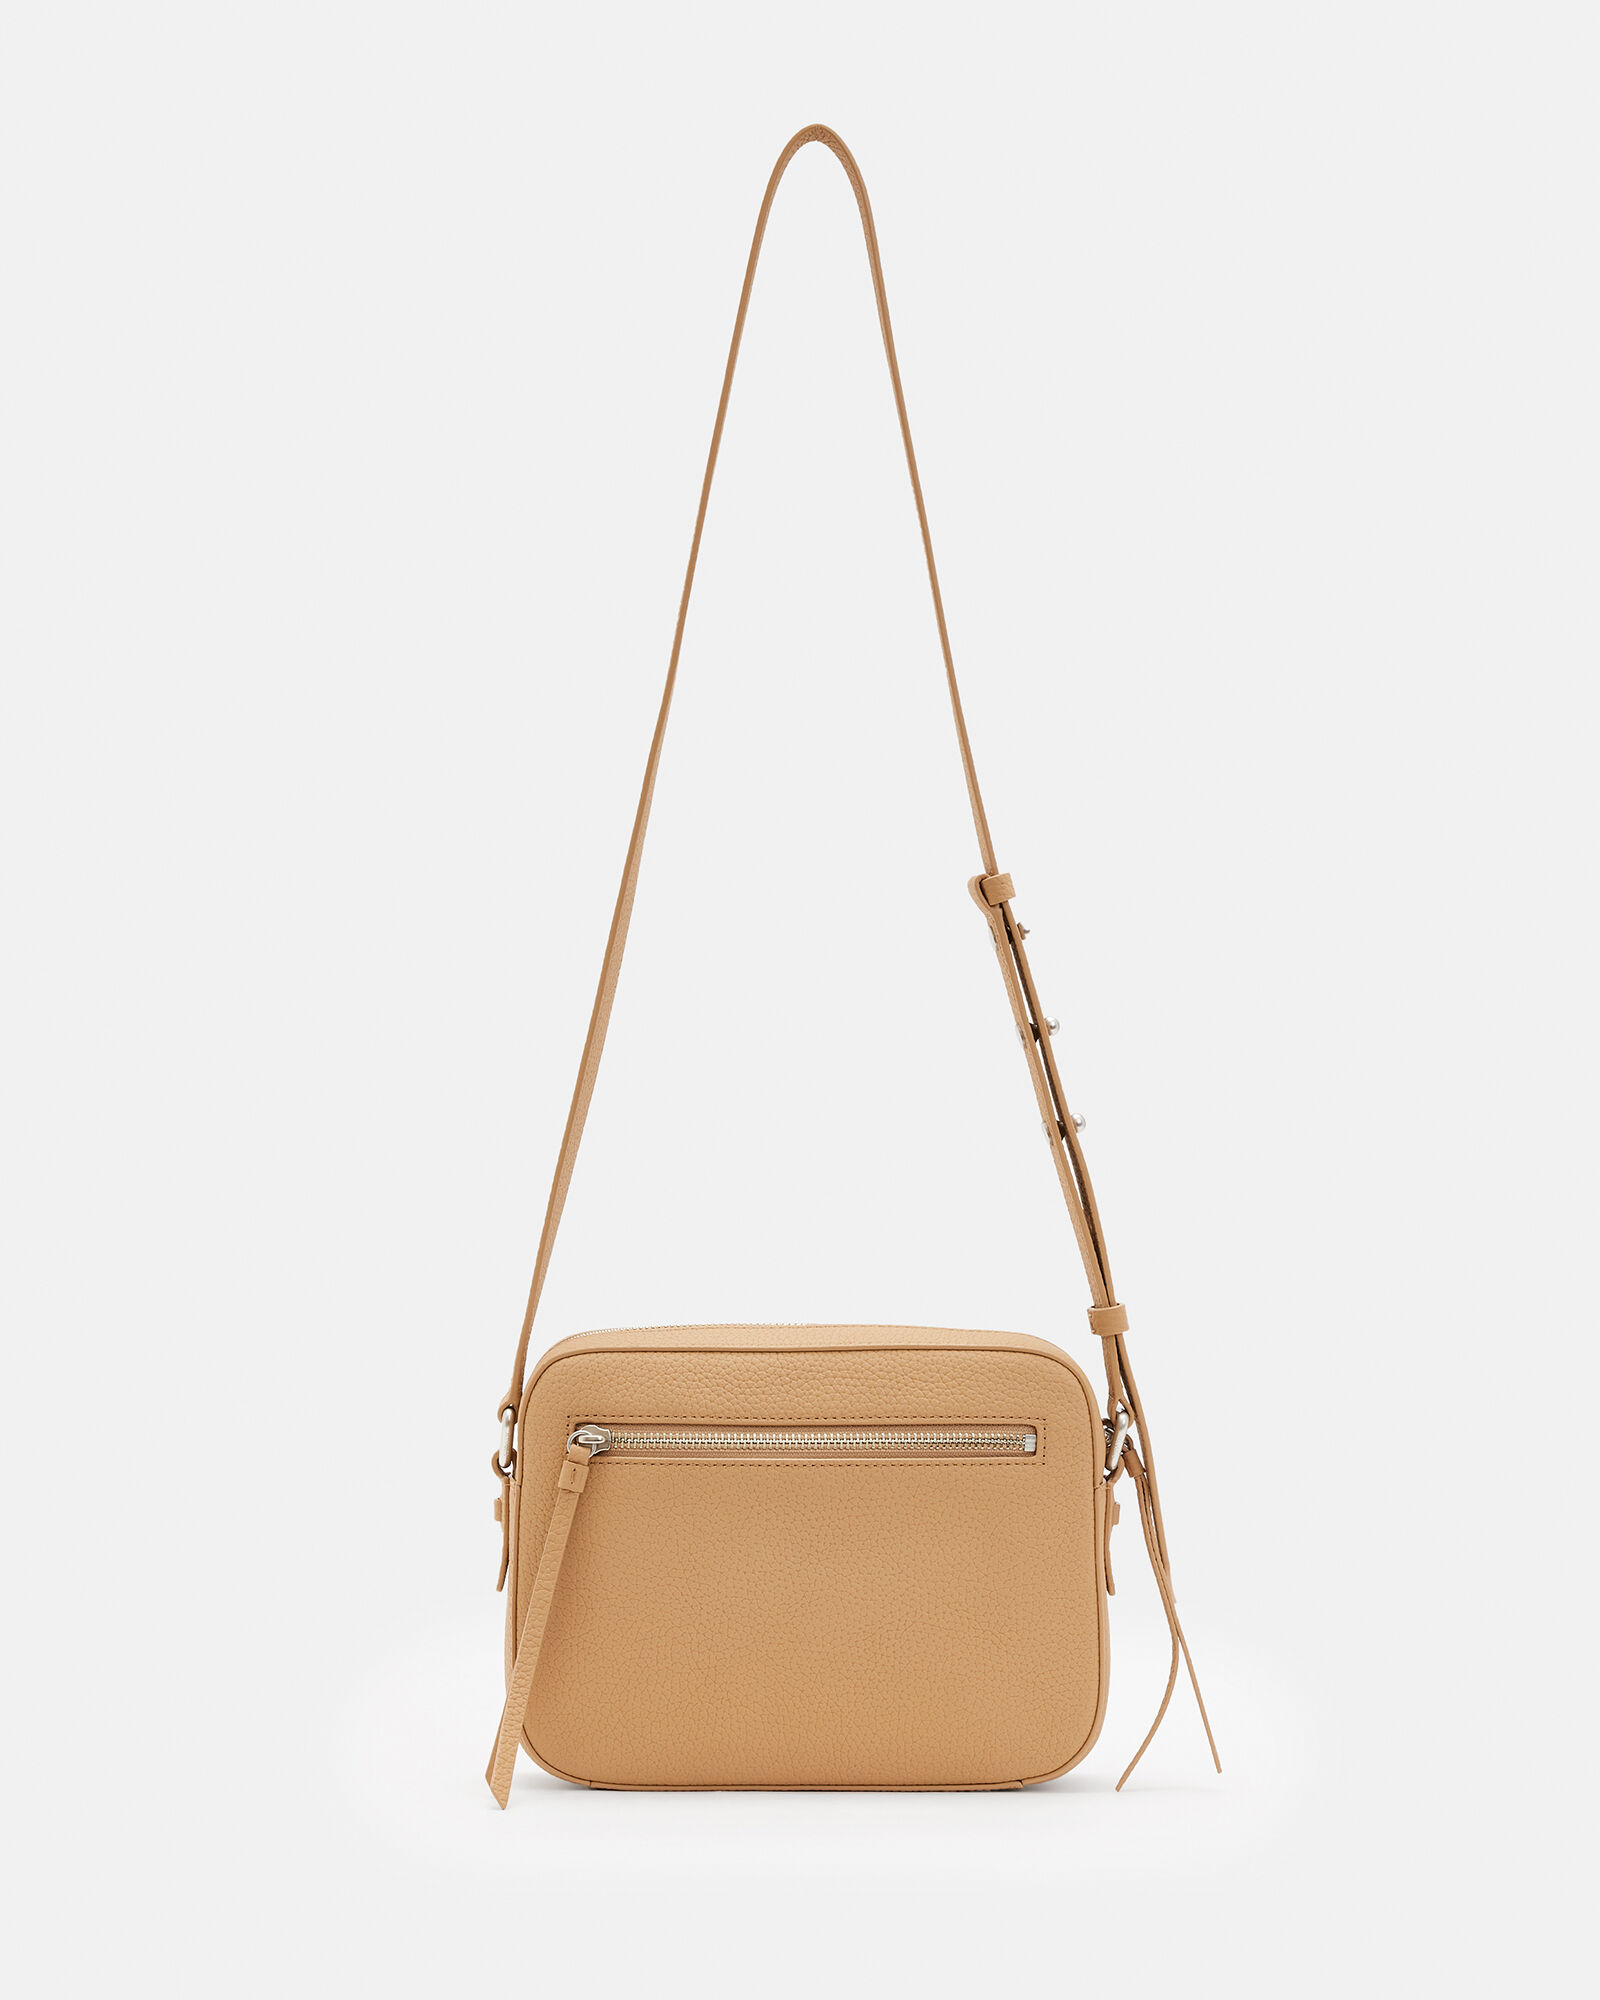 Loving the lunch box shaped bags but not loving this price. Any similar shaped  bags under $500(USD)? : r/handbags